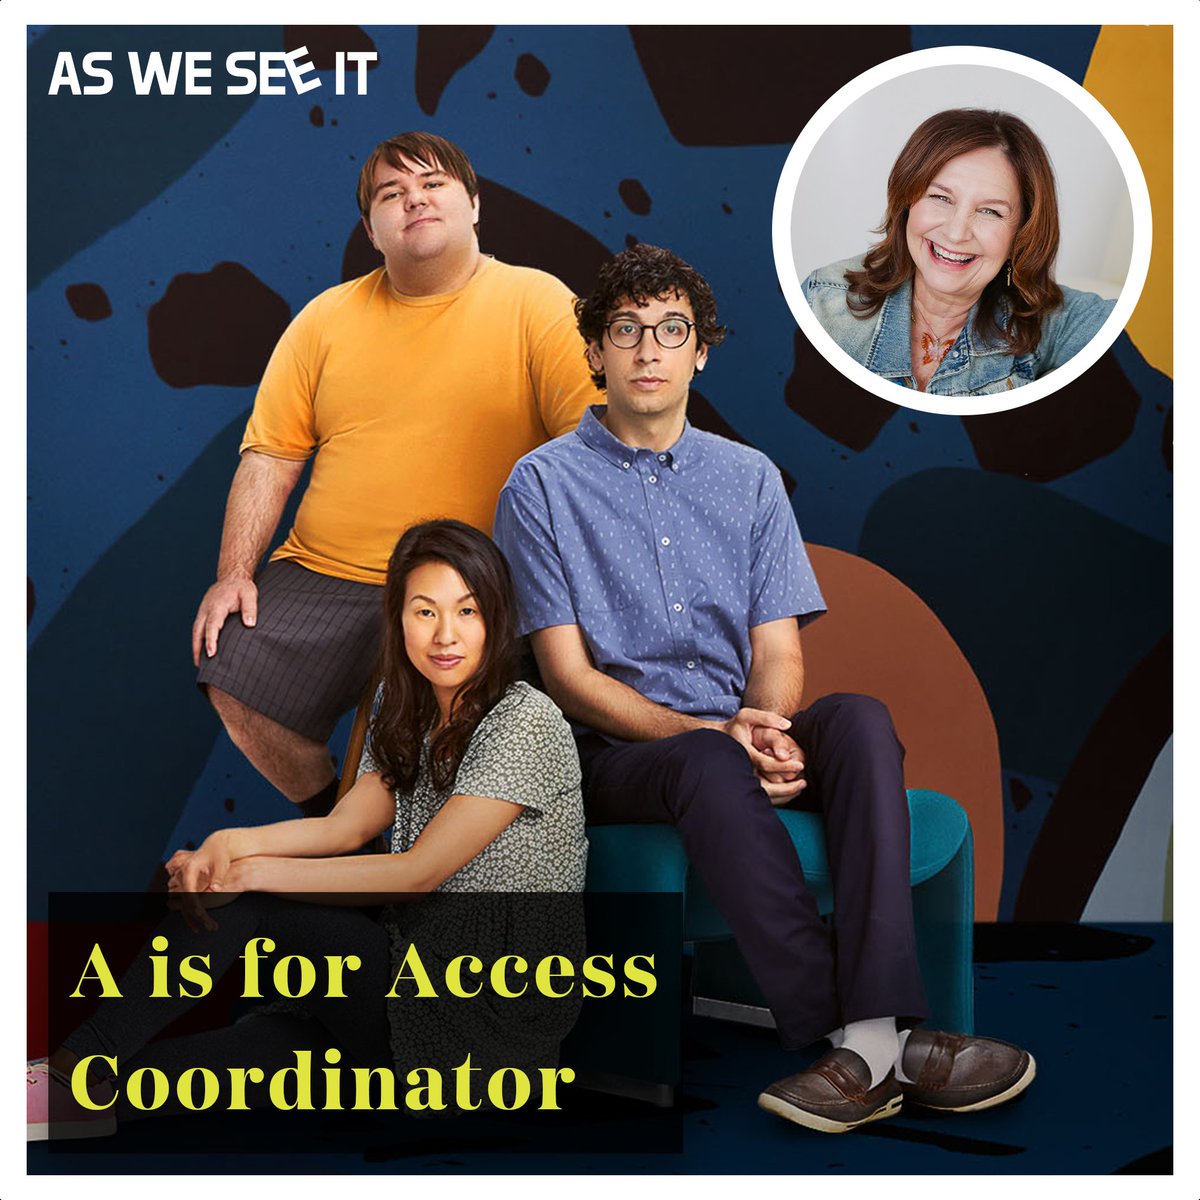 A is for Access Coordinator!

🧵

#1IN4Coalition #1IN4DisabilityAlphabet #AccessCoordinator #Disabled #Disability #DisabilityAwareness #Hollywood #Film #DisabilityInFilm #DisabilityInMedia #RepresentationMatters #DisabilityRepresentation #AccessibleSets #AccessibleHollywood #DEIA